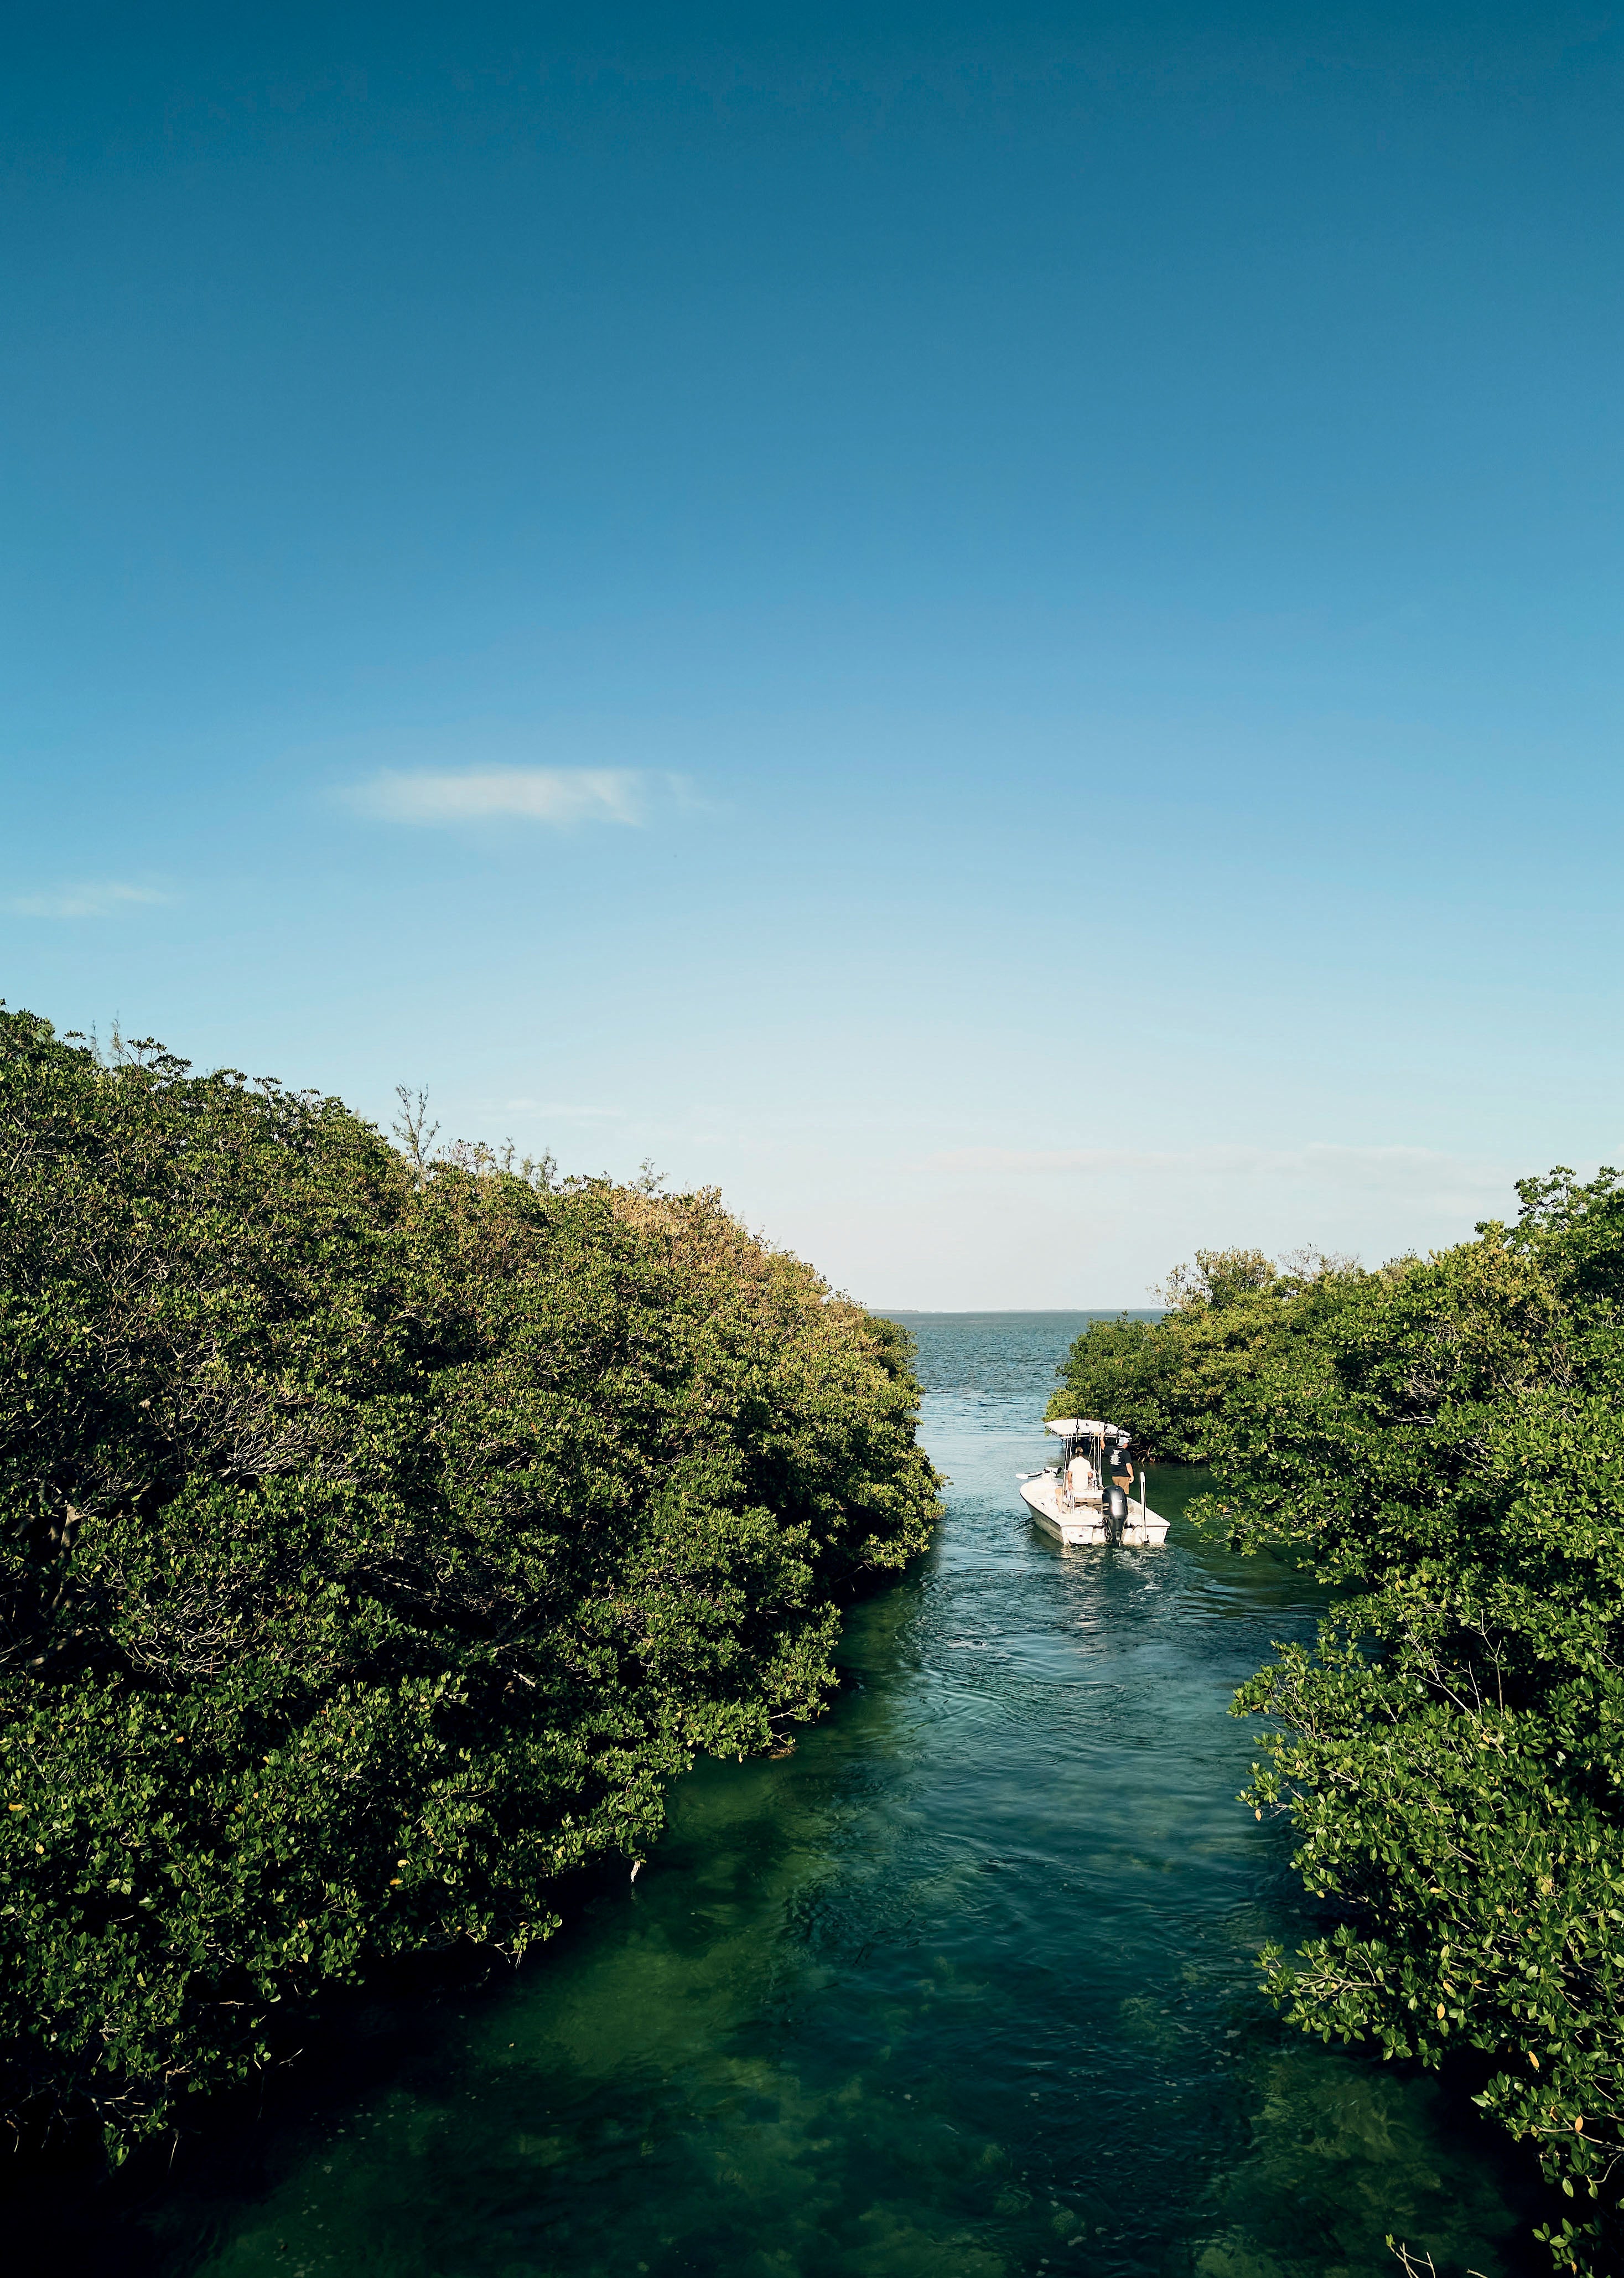 A boat navigates through a narrow channel flanked by dense green mangroves under a clear blue sky.